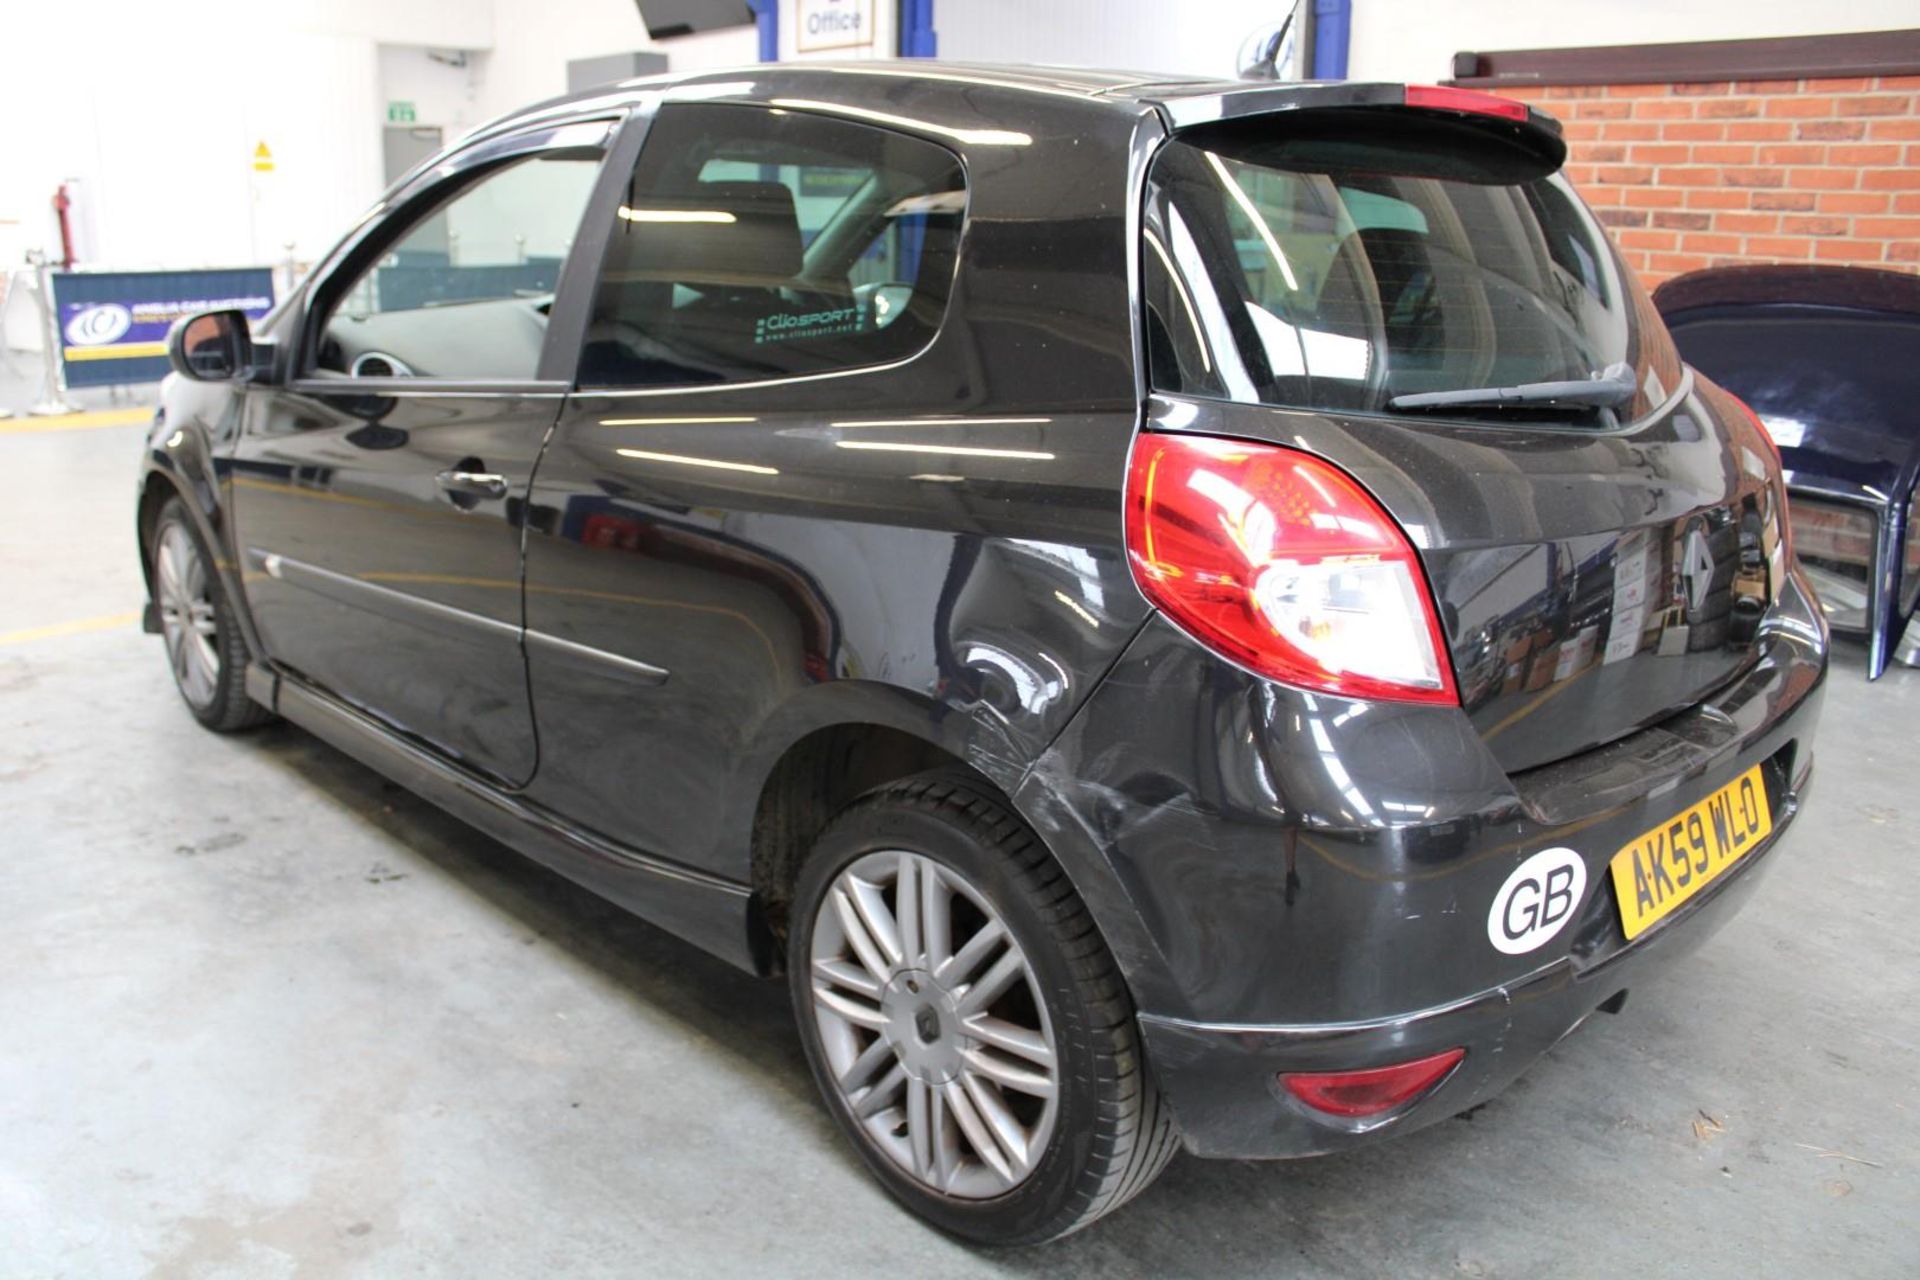 59 09 Renault Clio GT - Image 30 of 31